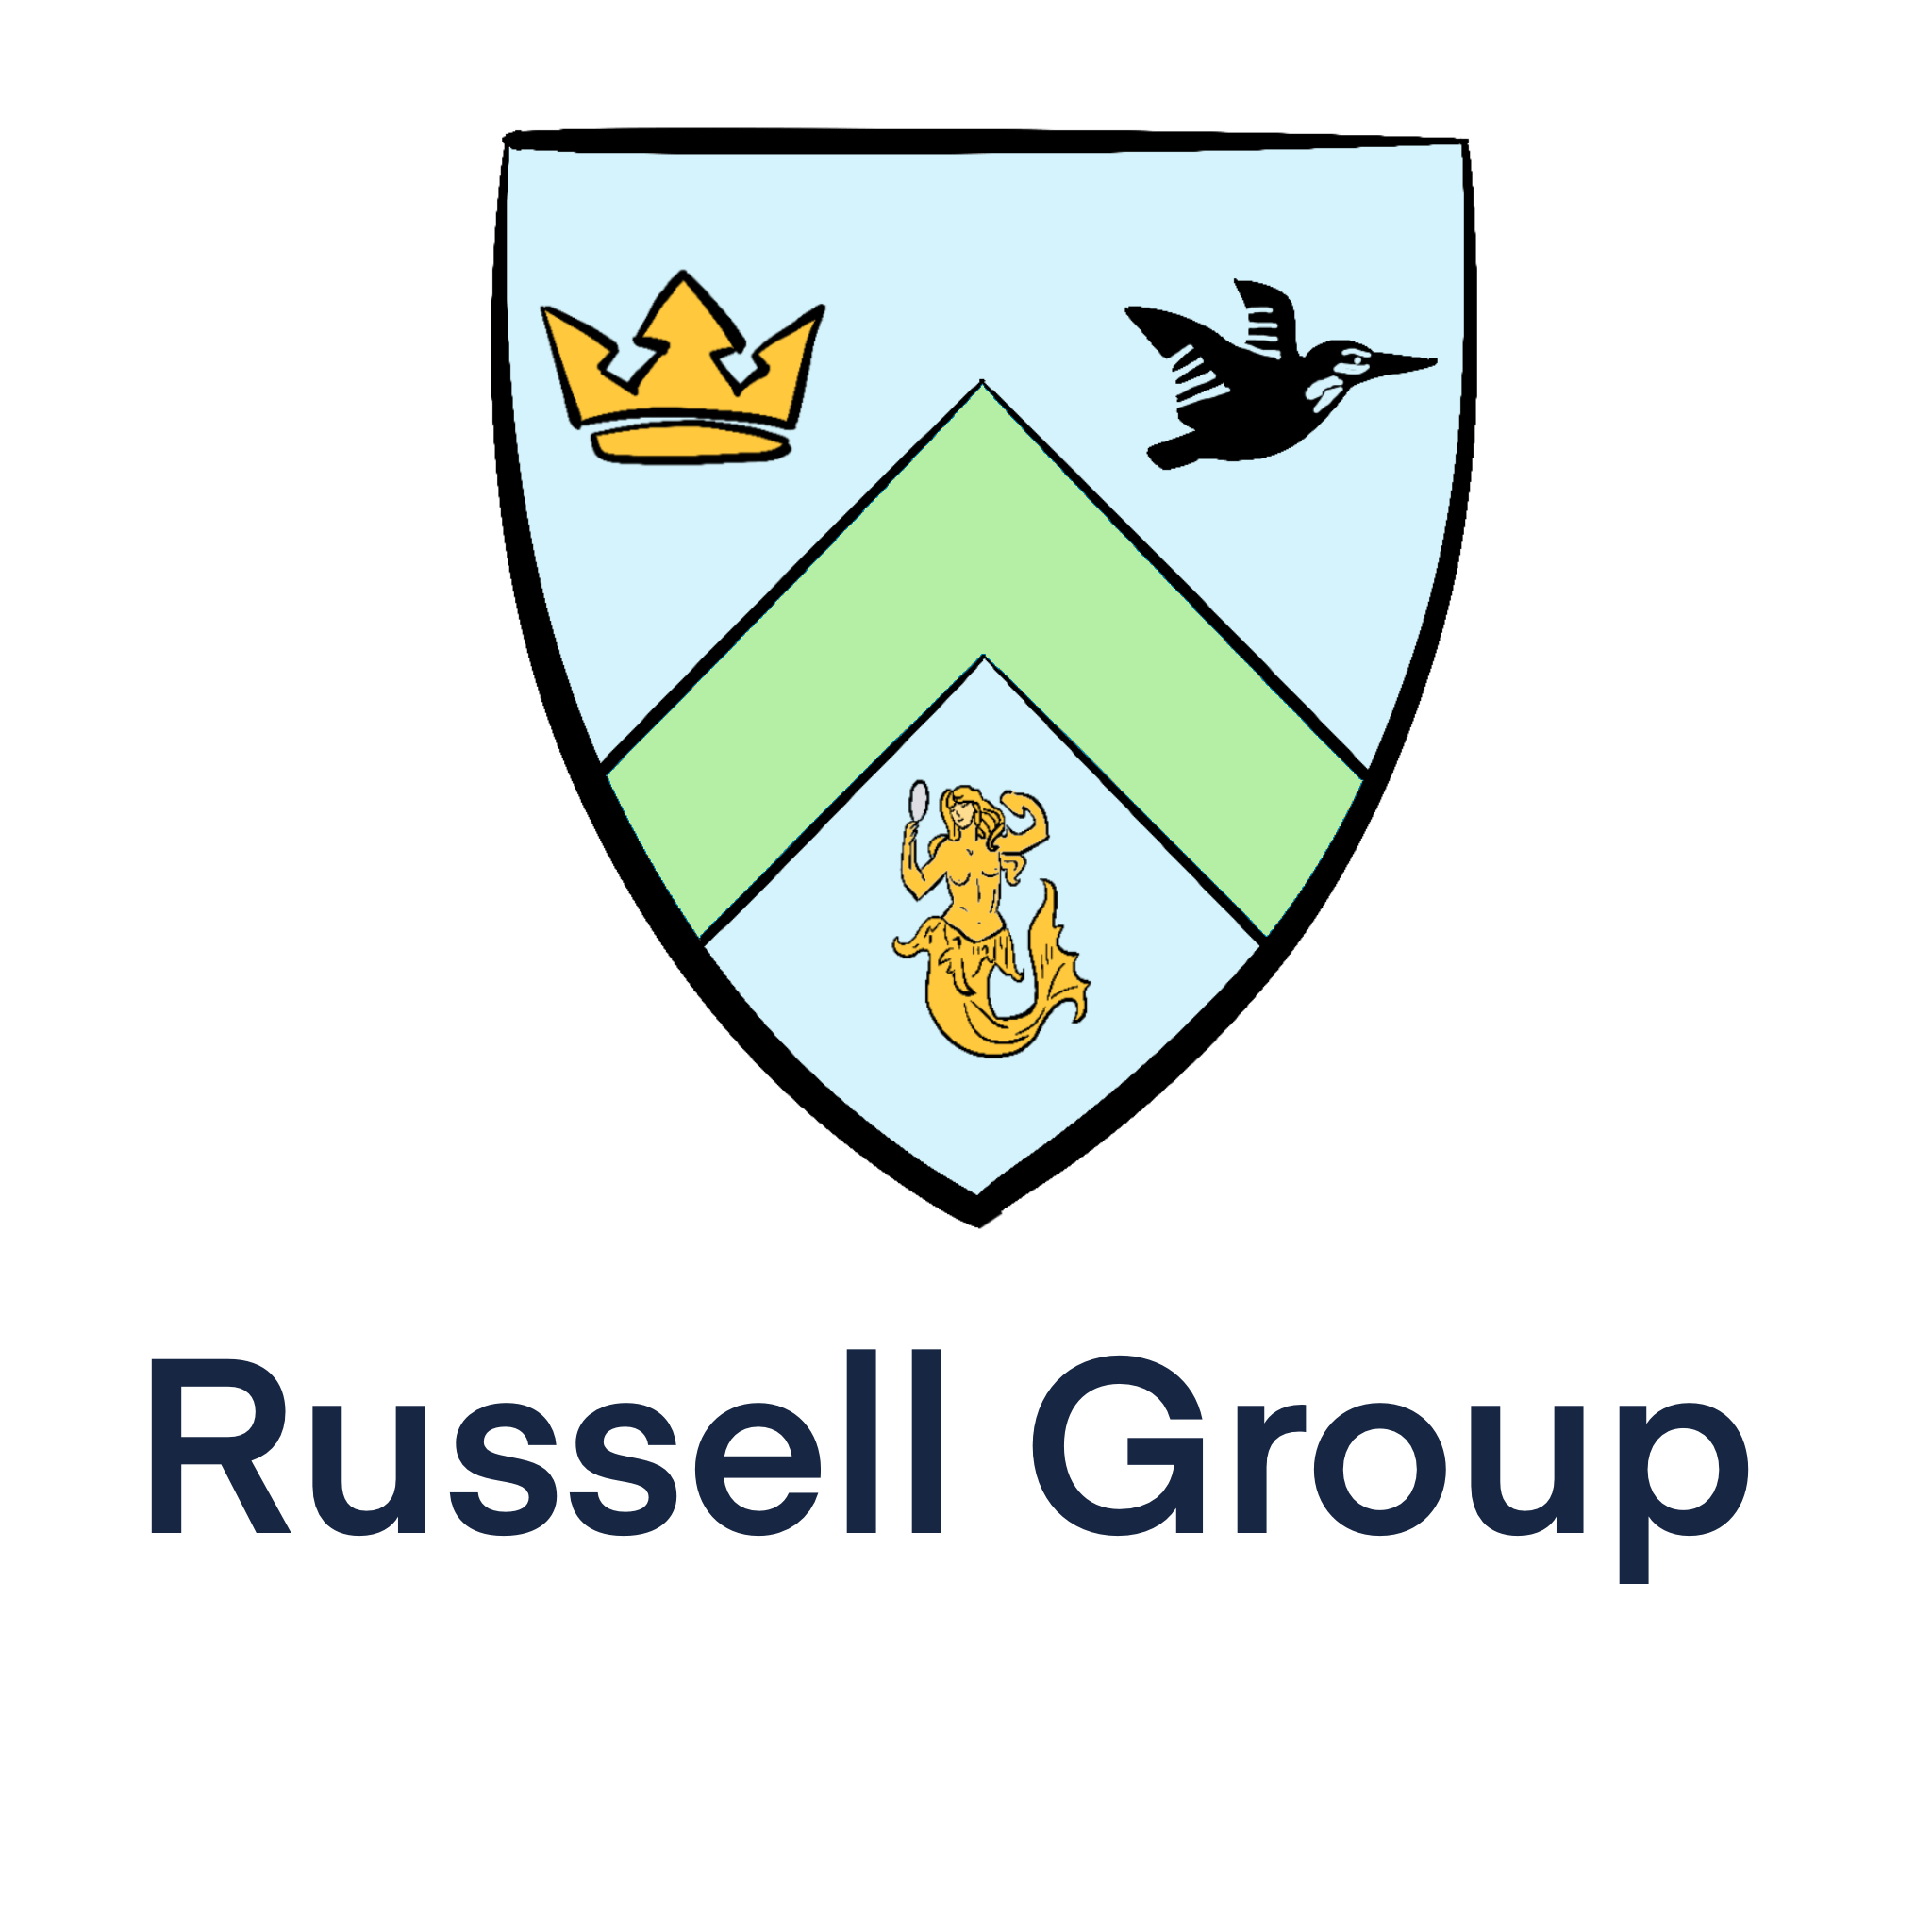 Alanya holds a degree from a Russell Group University